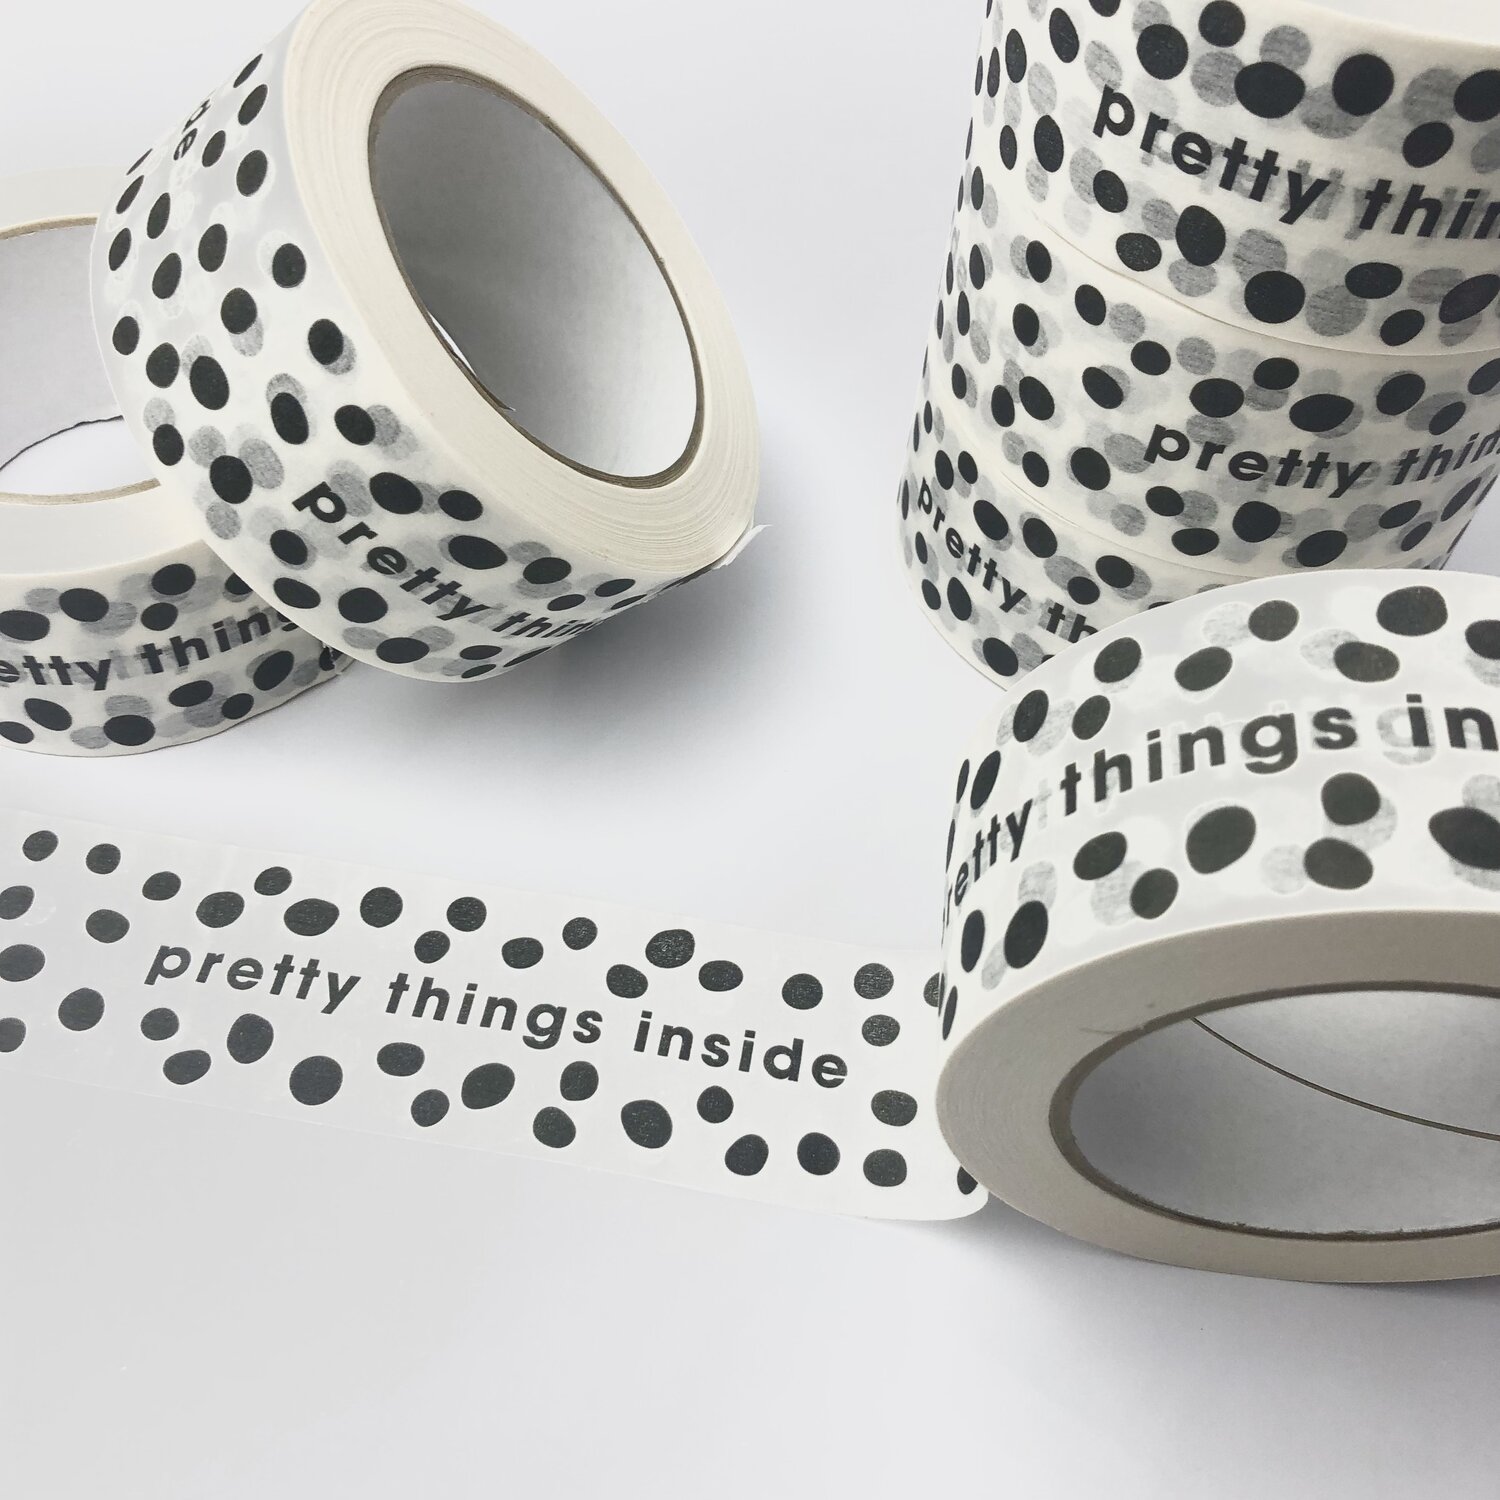 Pretty things inside, Eco packing tape